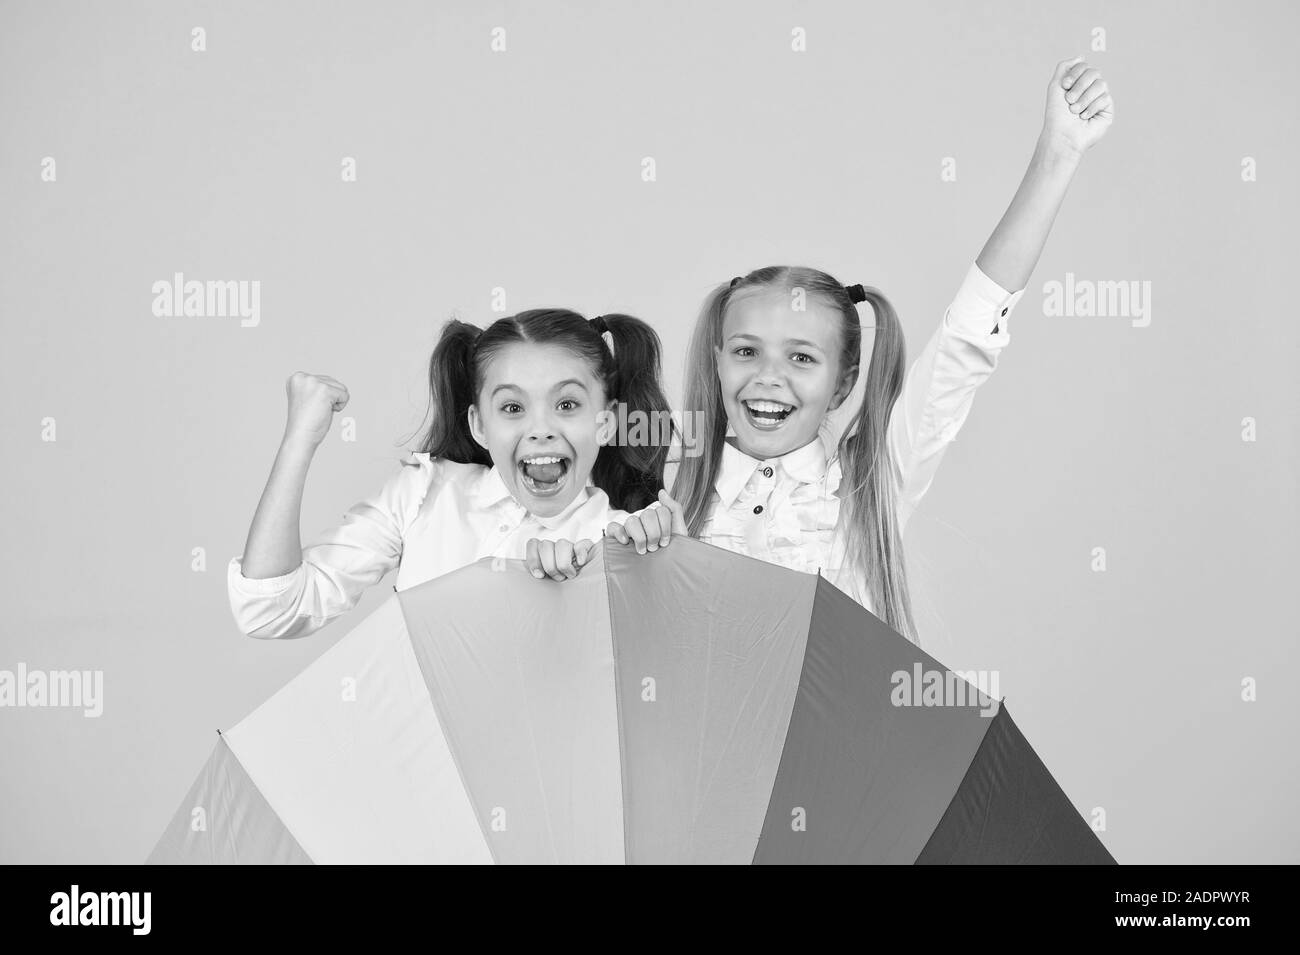 The coolest accessory in school. Happy little girls celebrating autumn holidays behind fashion accessory. Small children smiling with colorful umbrella rain accessory. Best accessory trend for fall. Stock Photo